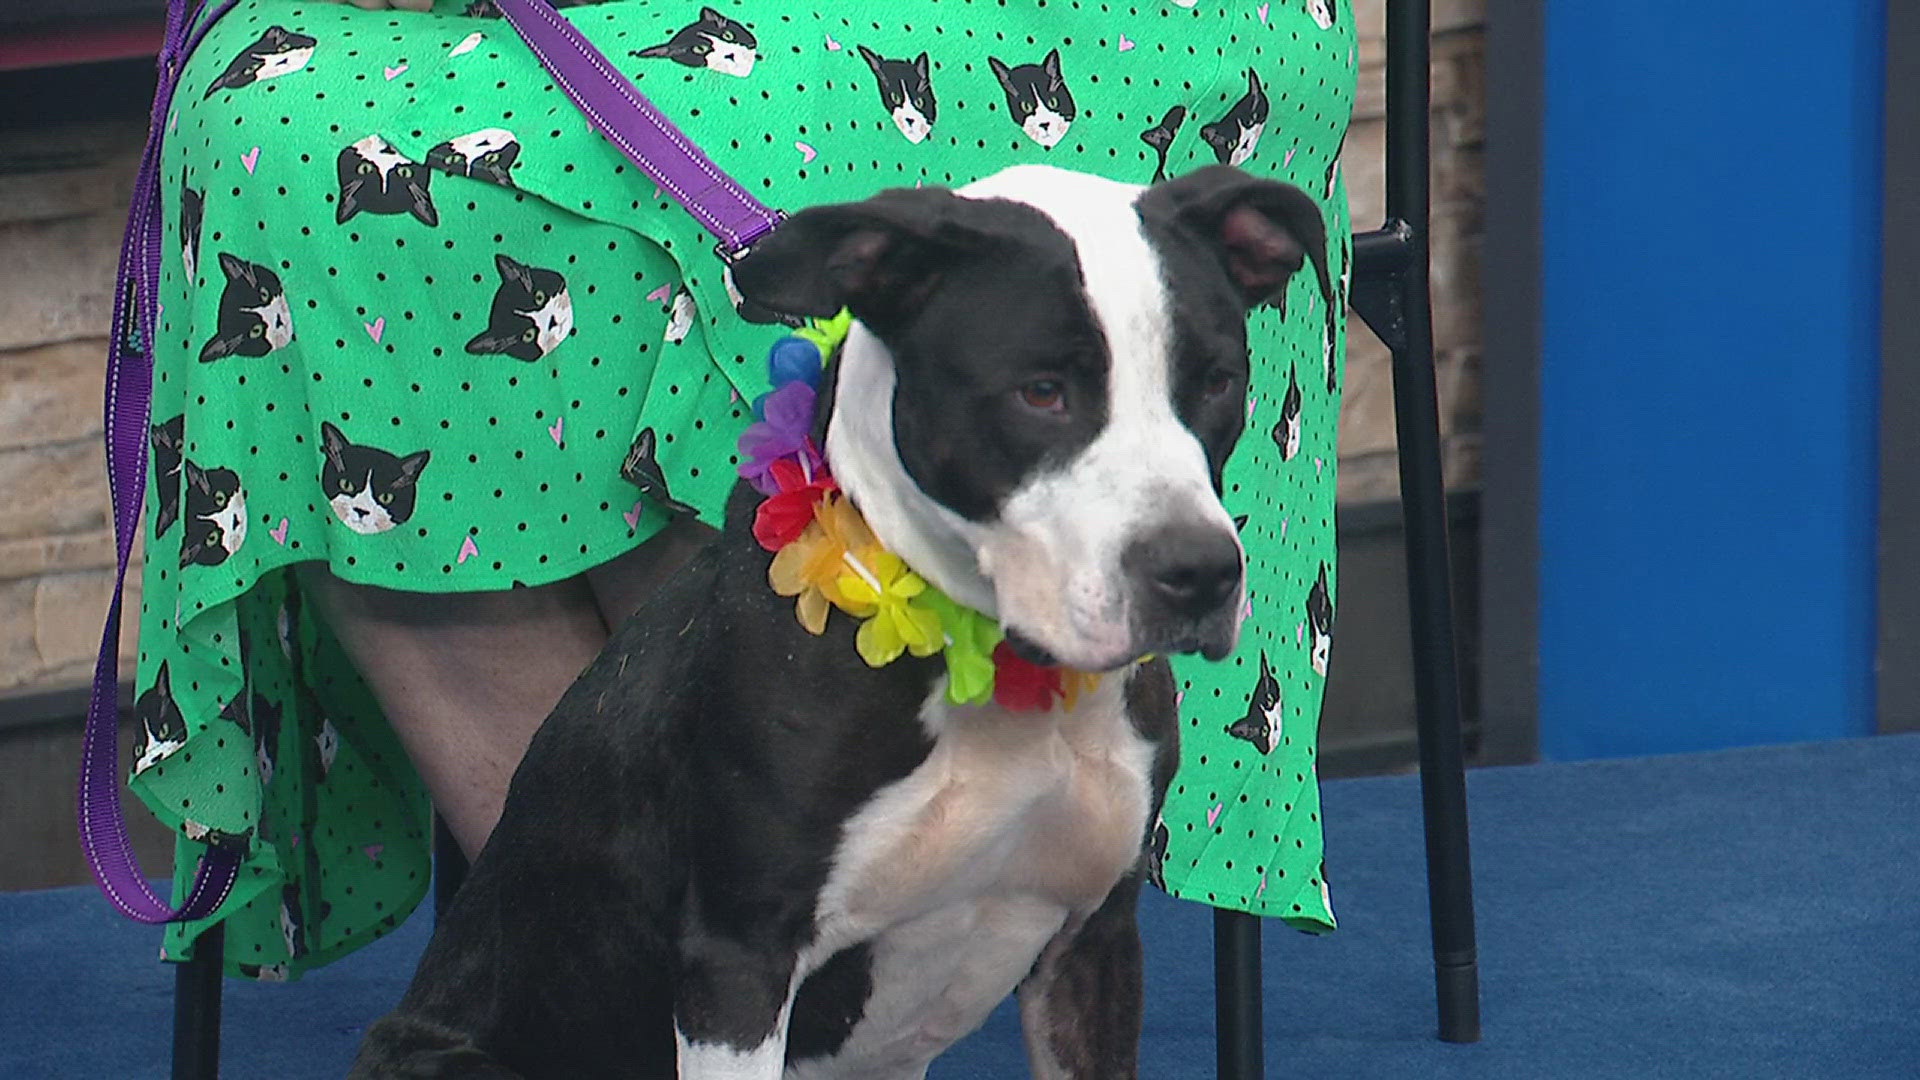 News 8 and the Quad City Animal Welfare Center partner each week to help pets find their forever homes.